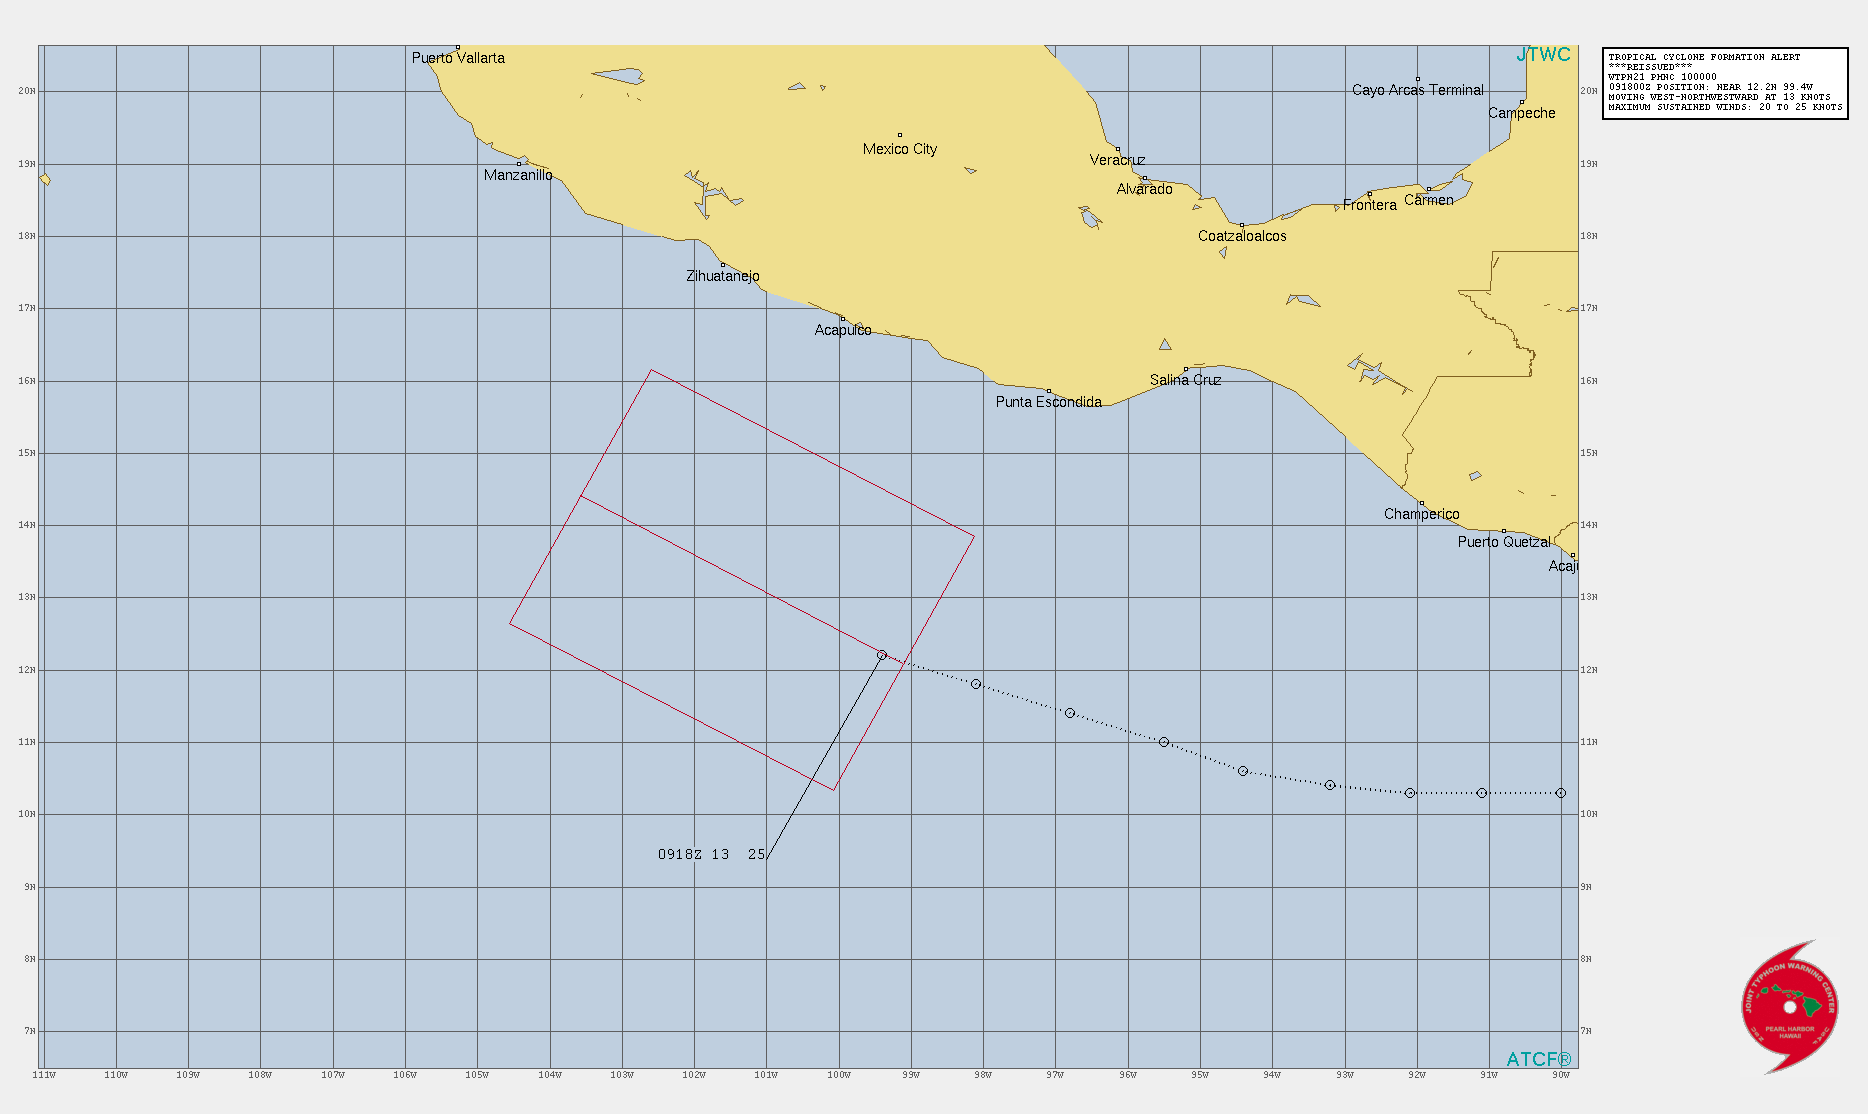 EASTERN PACIFIC. INVEST 93E. TROPICAL CYCLONE FORMATION ALERT RE-ISSUED AT 10/00UTC.